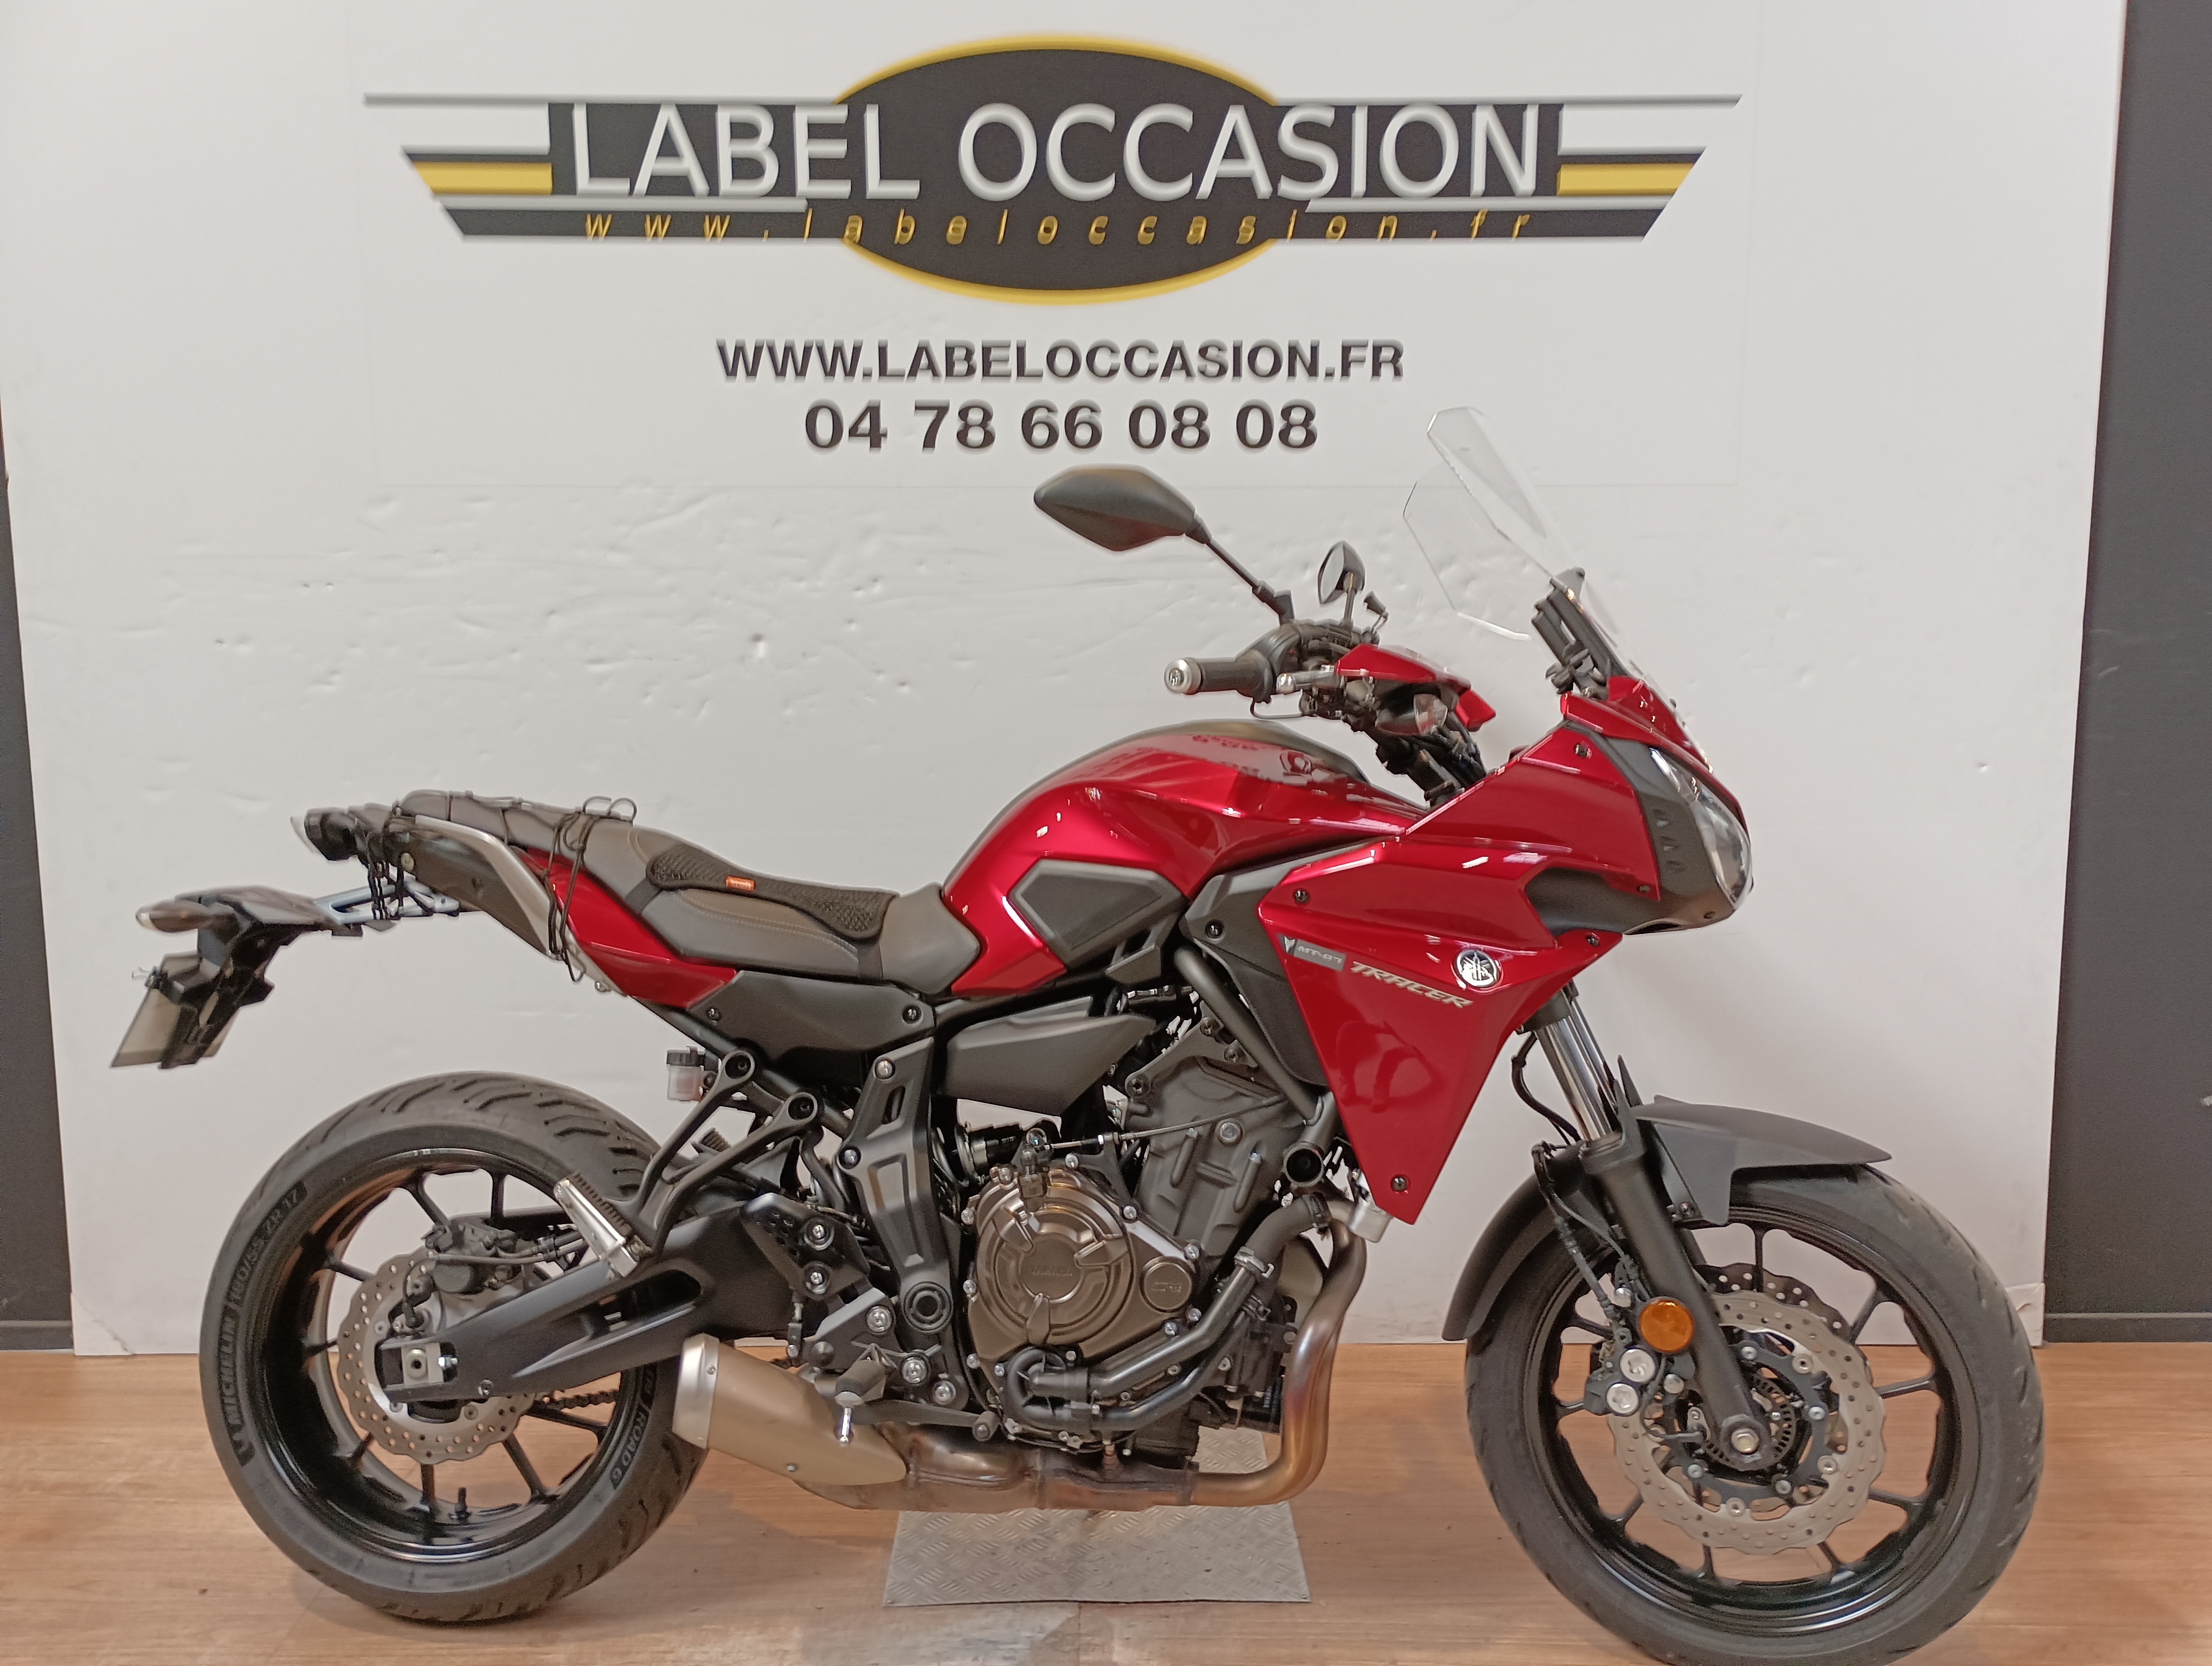 Annonce moto Yamaha mt 07 tracer